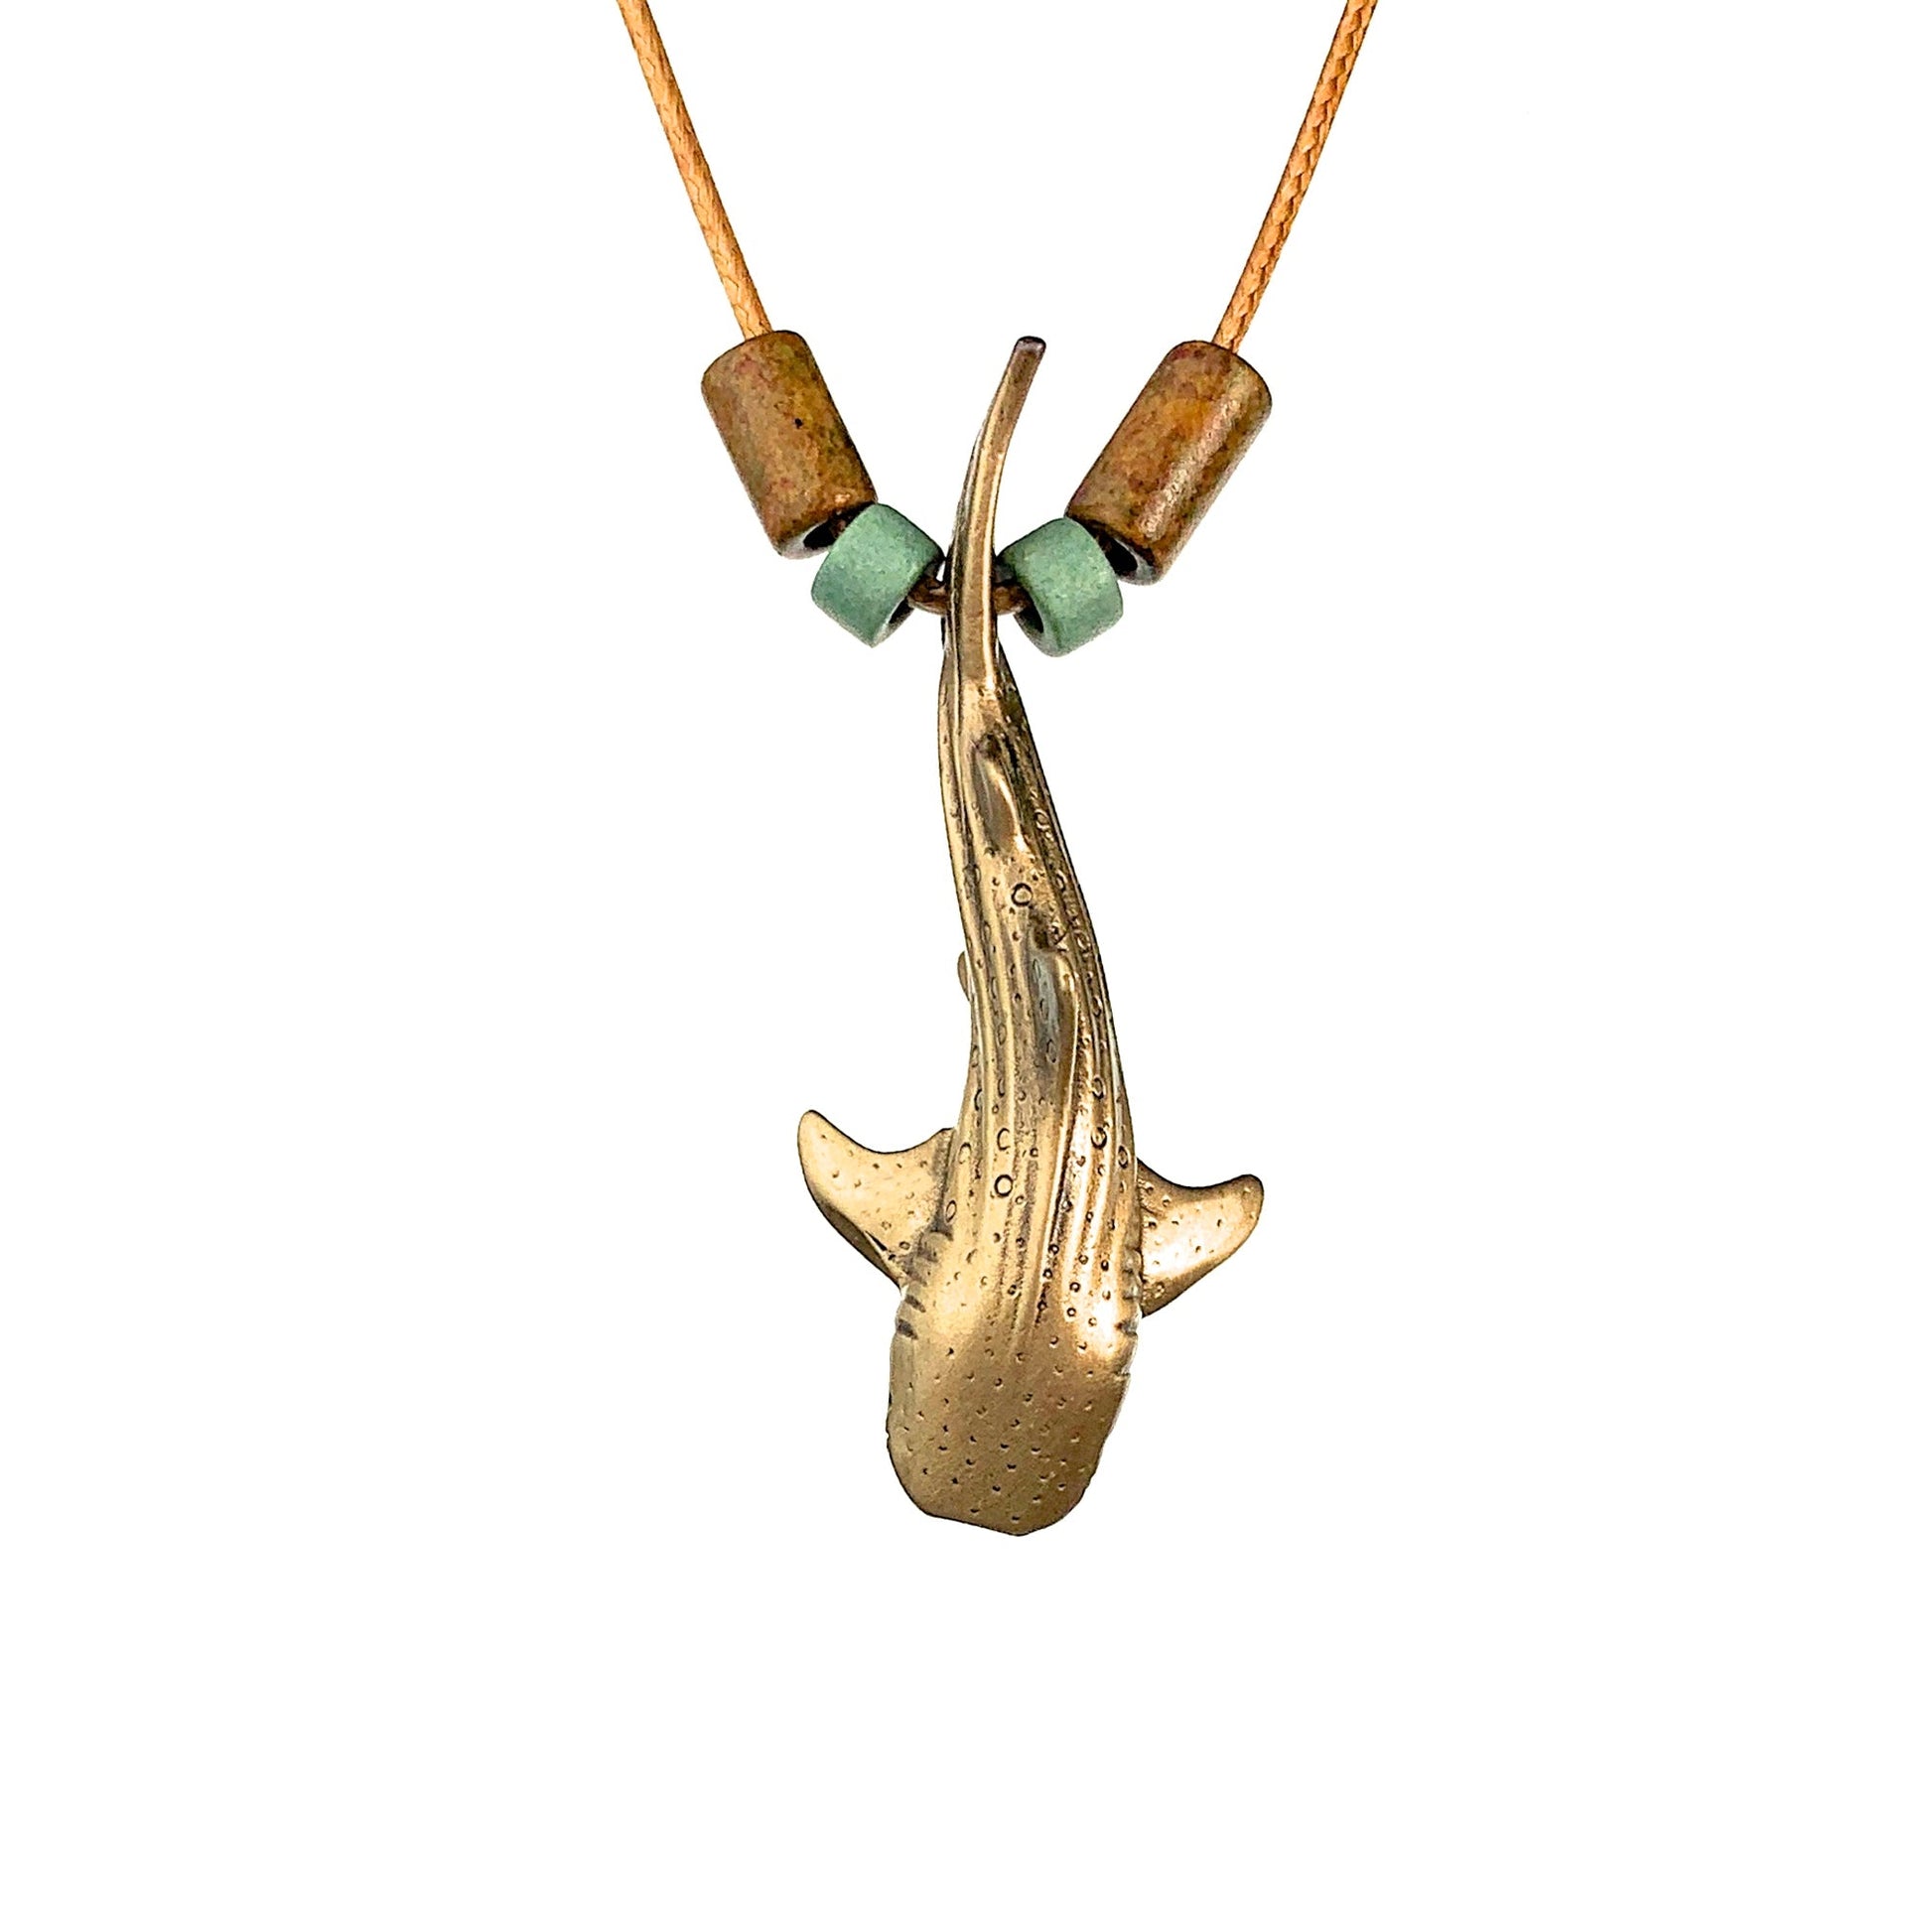 Whale Shark Necklace for Men and Women- Bronze Whale Shark Pendant for Men and Women, Shark Jewelry, Gifts for Shark Lovers, Sea Life Jewelry - The Tool Store